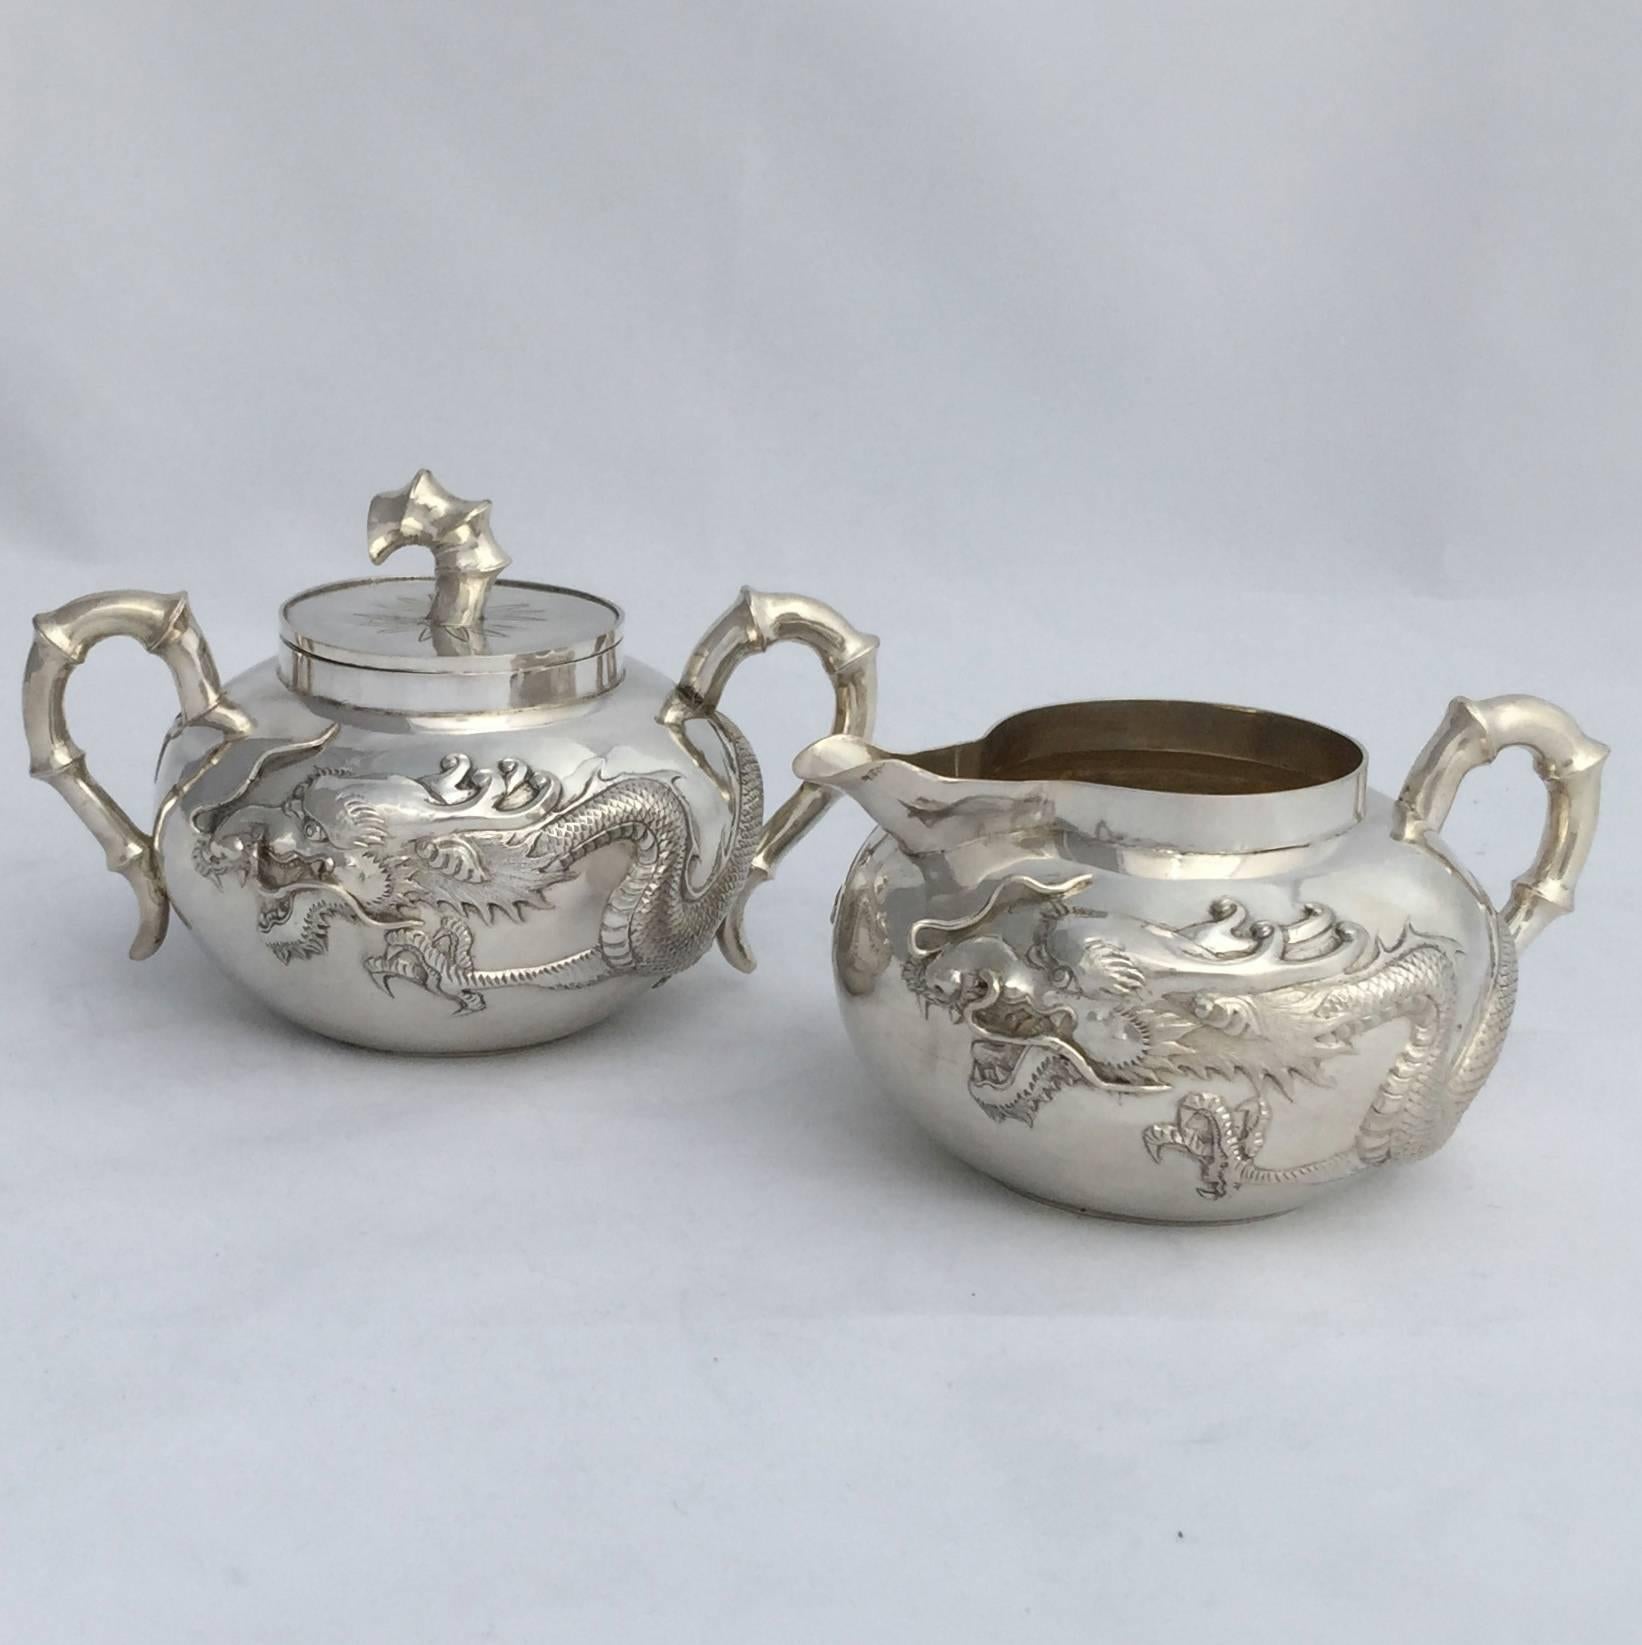 A Classic Chinese Export silver (CES) three-piece tea set. Each piece has been repousse worked with four clawed dragons against a polished surface. The sugar bowl retains its original lid and both the sugar and cream have gilded interiors. The